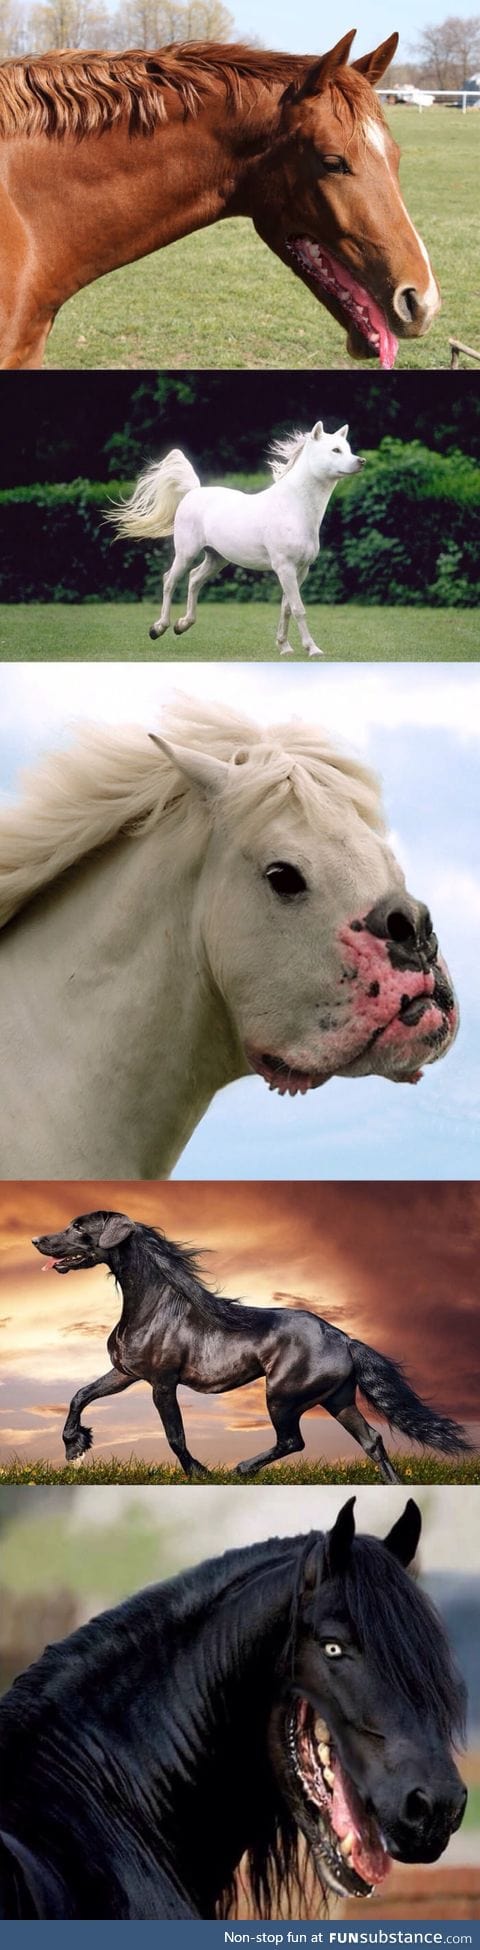 If a horses mouth was like a dogs